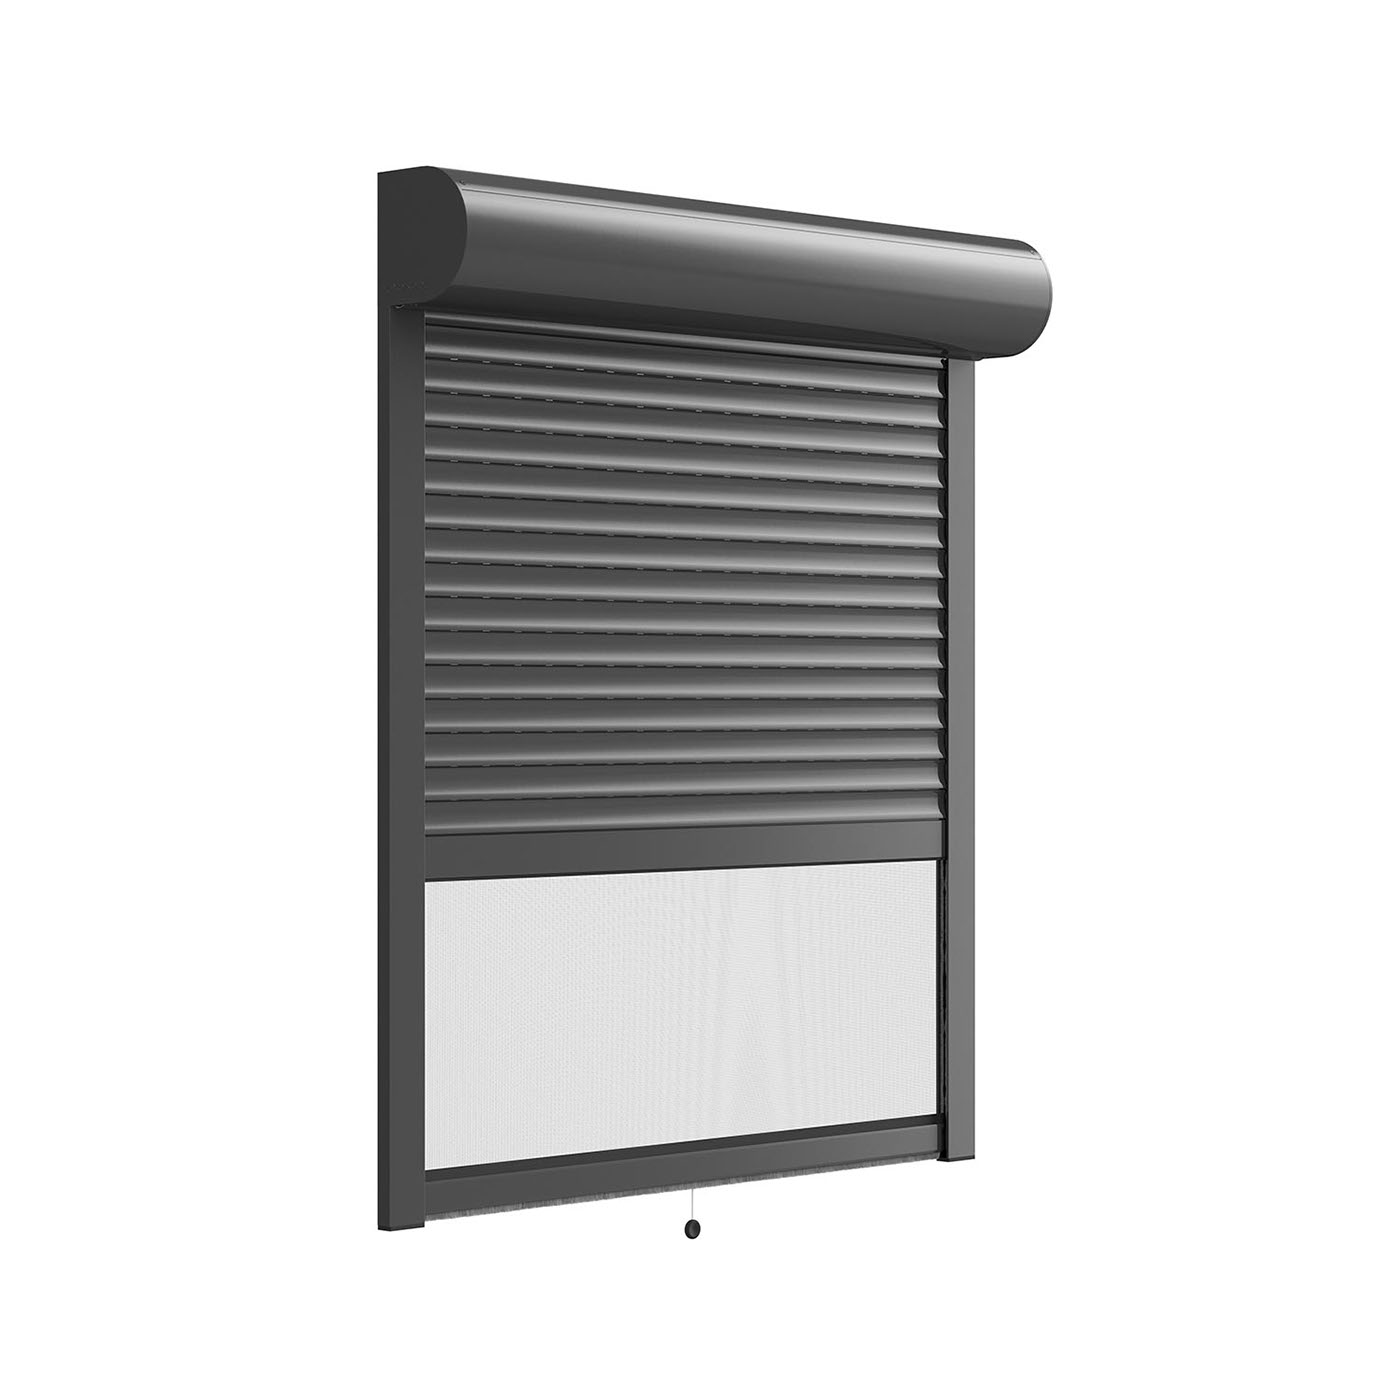 pleat shade vertical blind panel track Roman Blind aluminum wooden blind roller blind mosquito screen Rolling Shutter żaluzje rolety product visualization